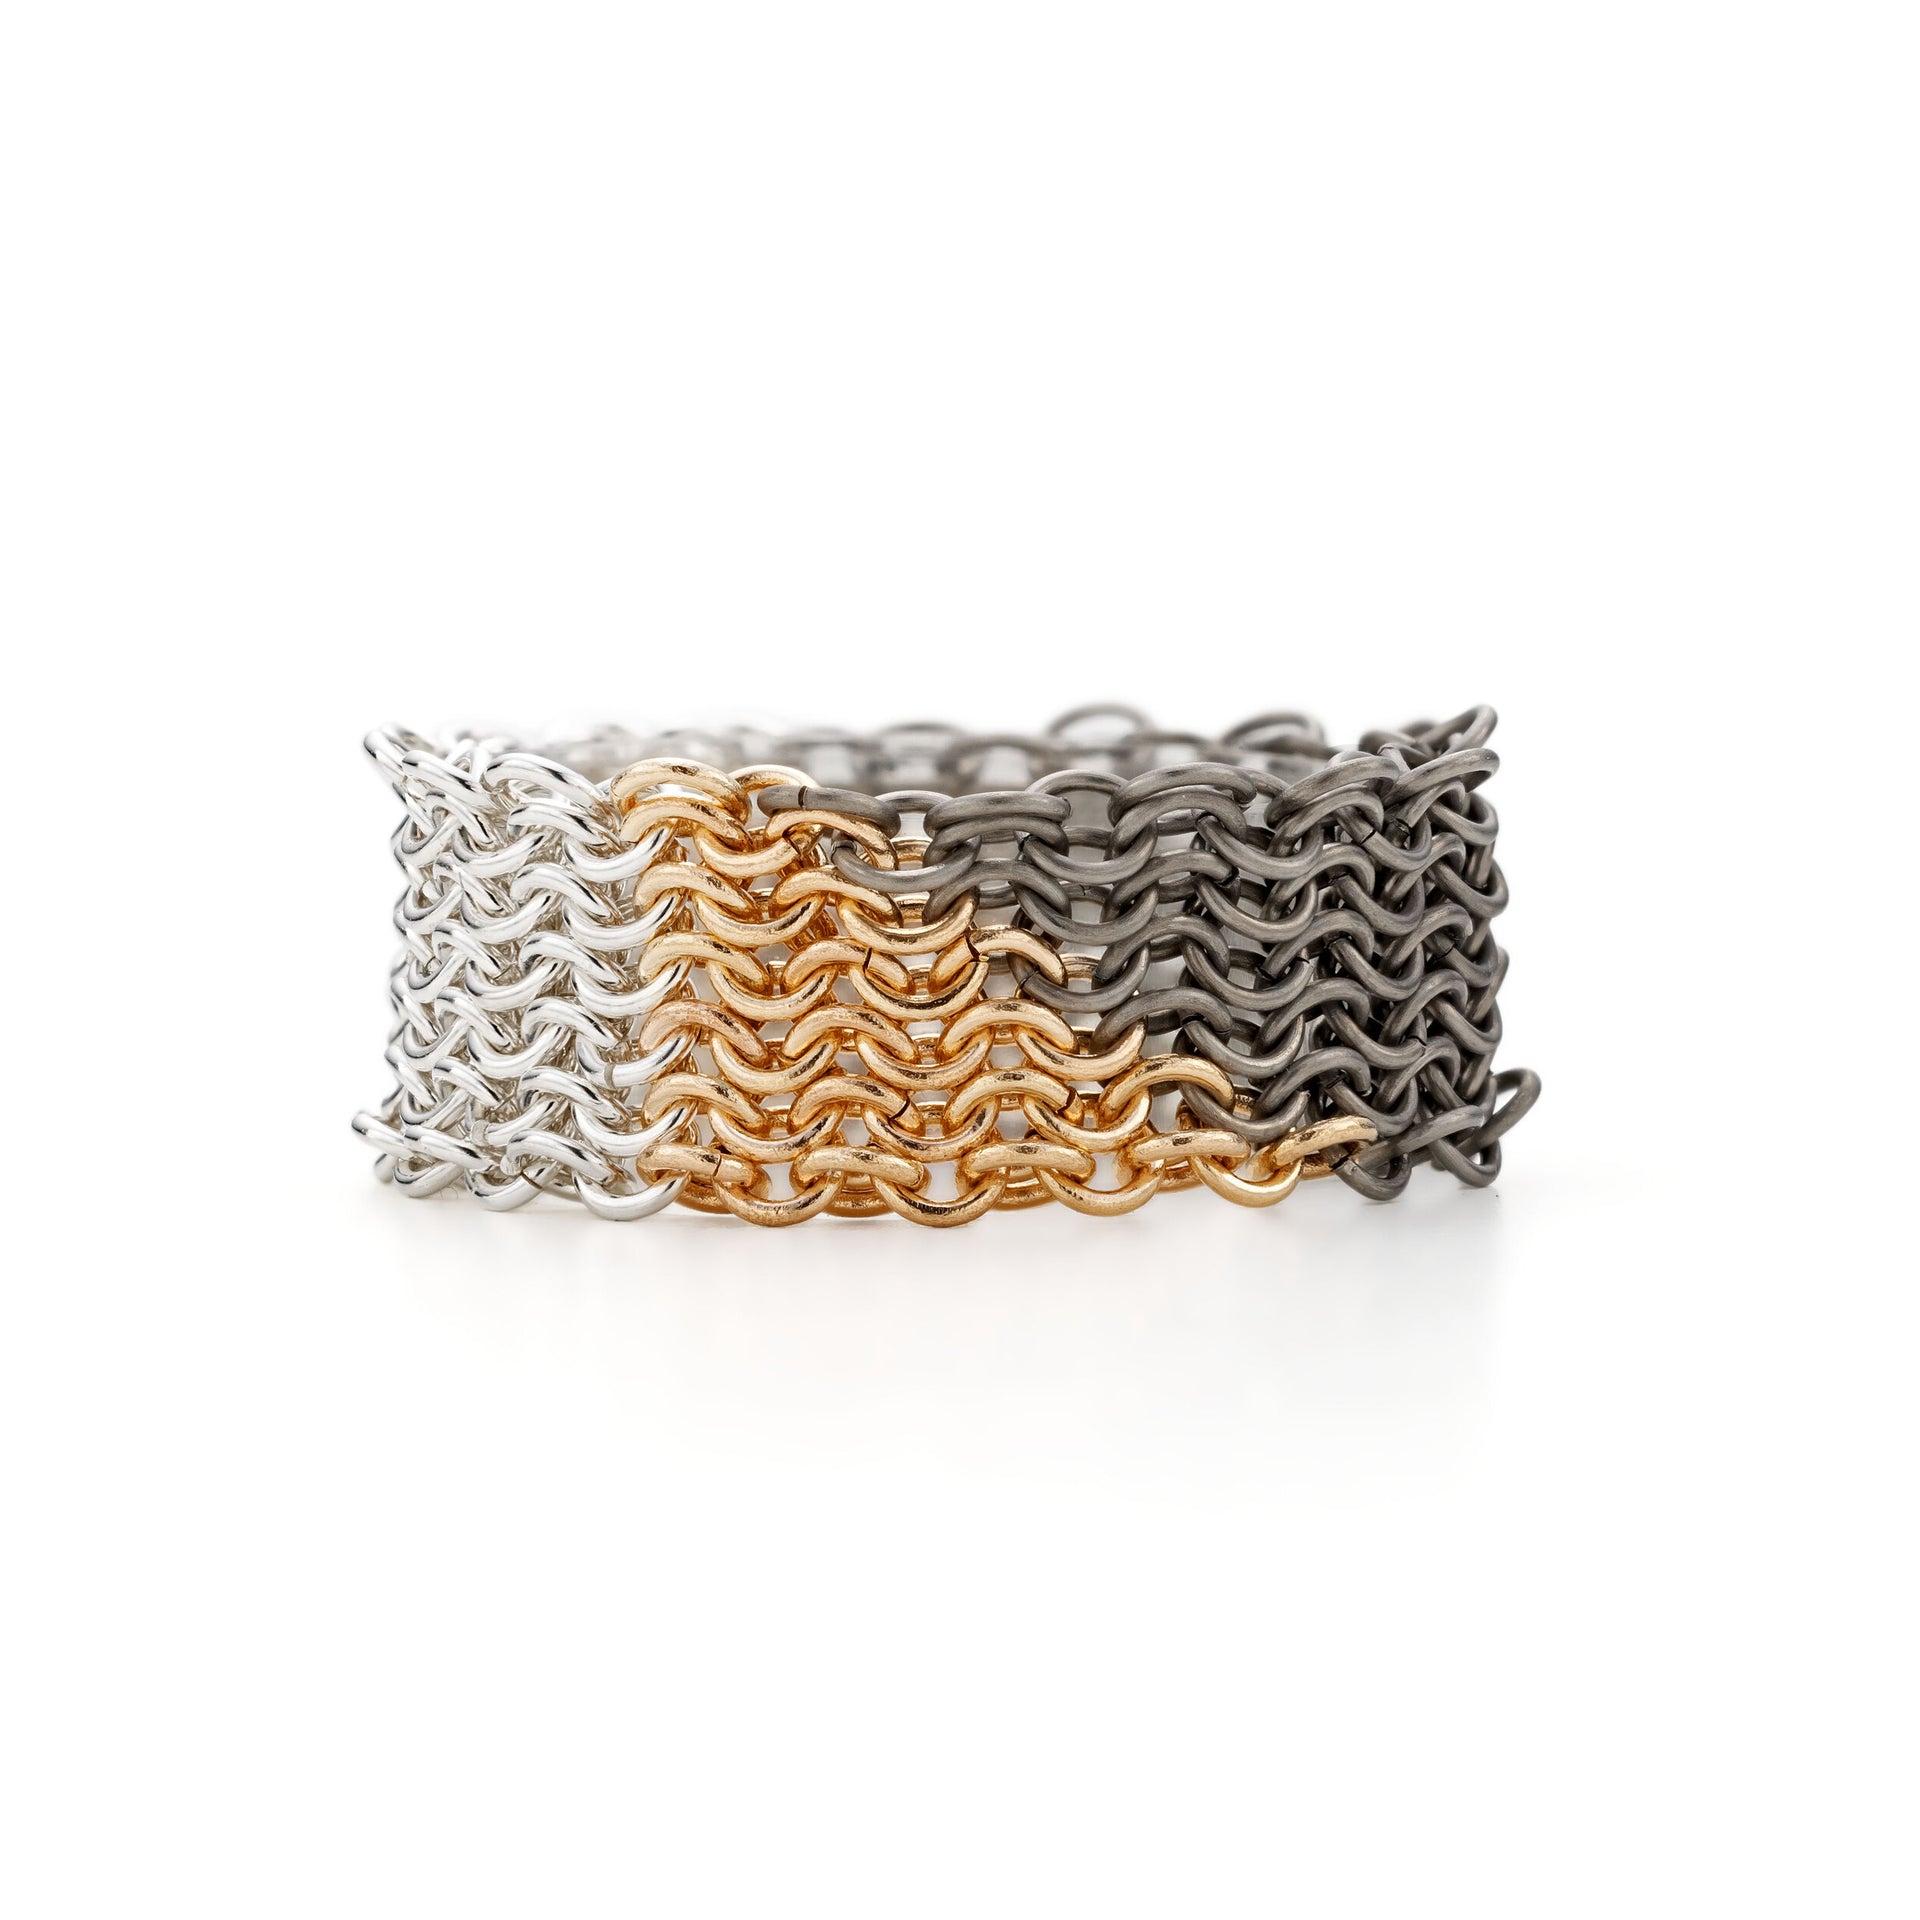 SunDial Chainmail ring contemporary chain jewellery titanium, recycled silver and 18ct yellow gold handmade by Corrinne Eira Evans. As featured in British Vogue 2022